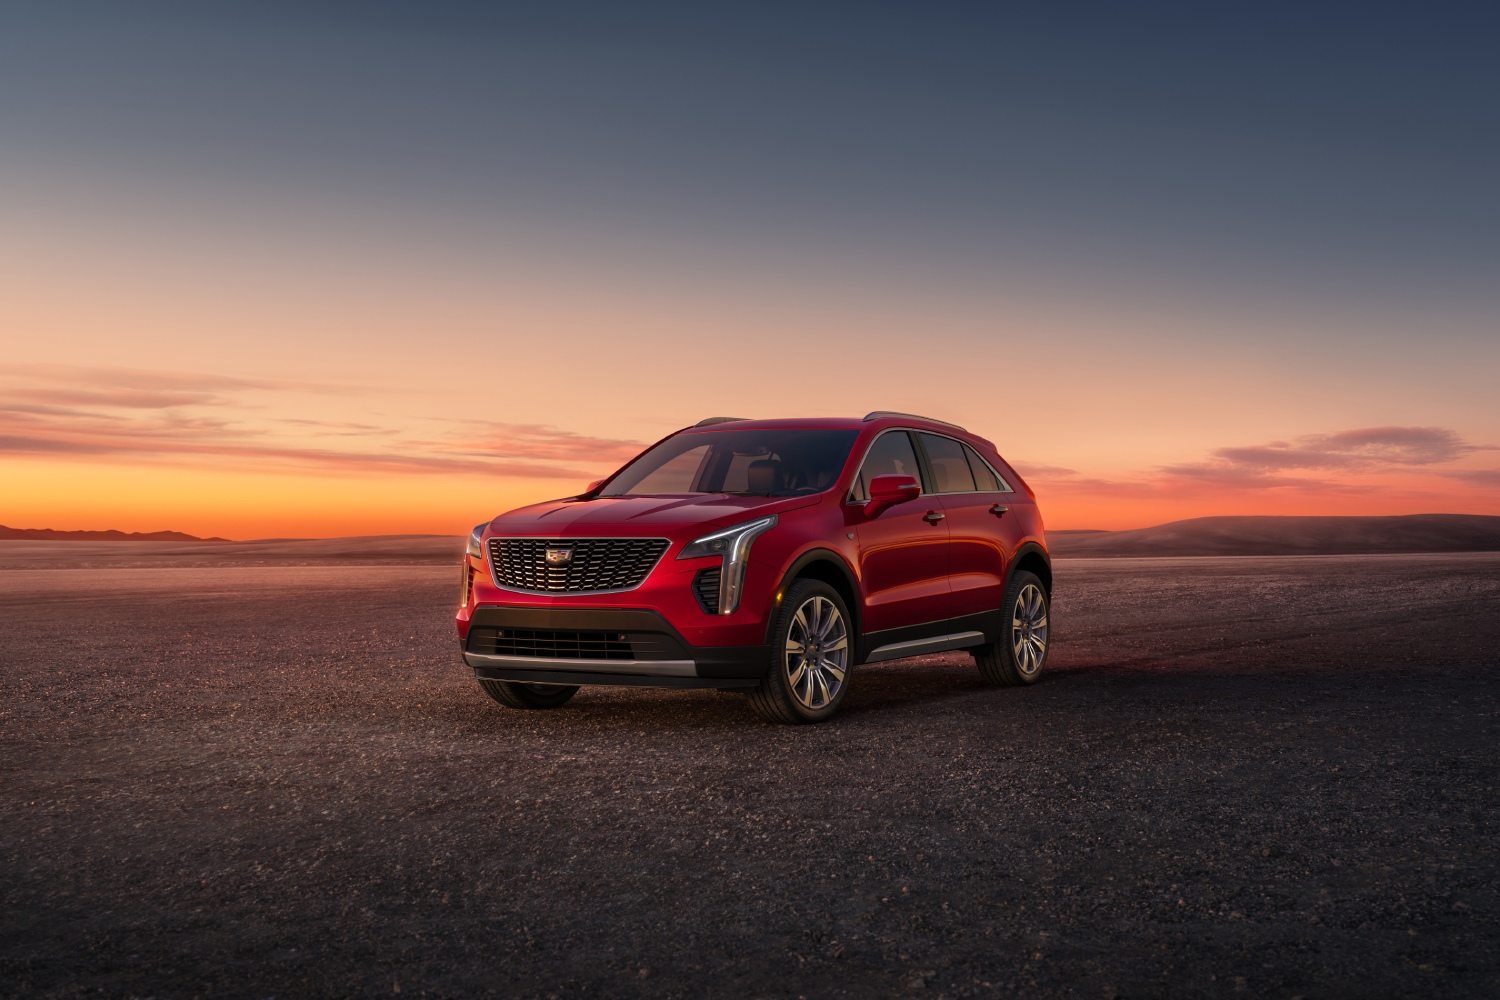 This Cadillac XT4 is one of the cheapest new luxury SUV models